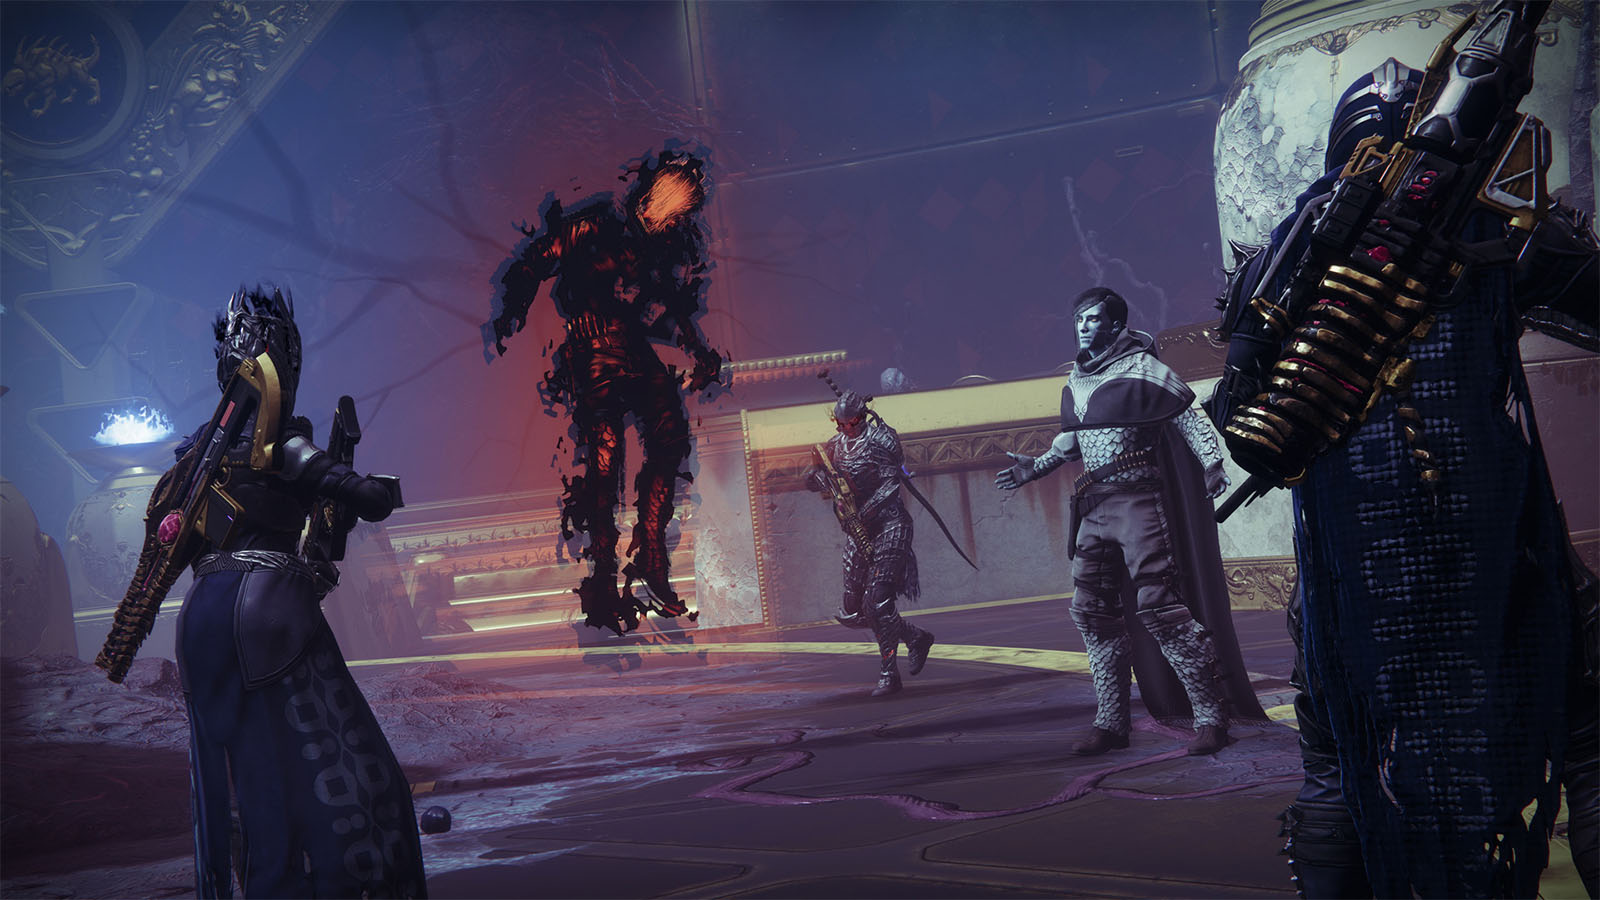 Bungie Sues Destiny 2 Streamer For Repeatedly Cheating And Harassing Its Employees